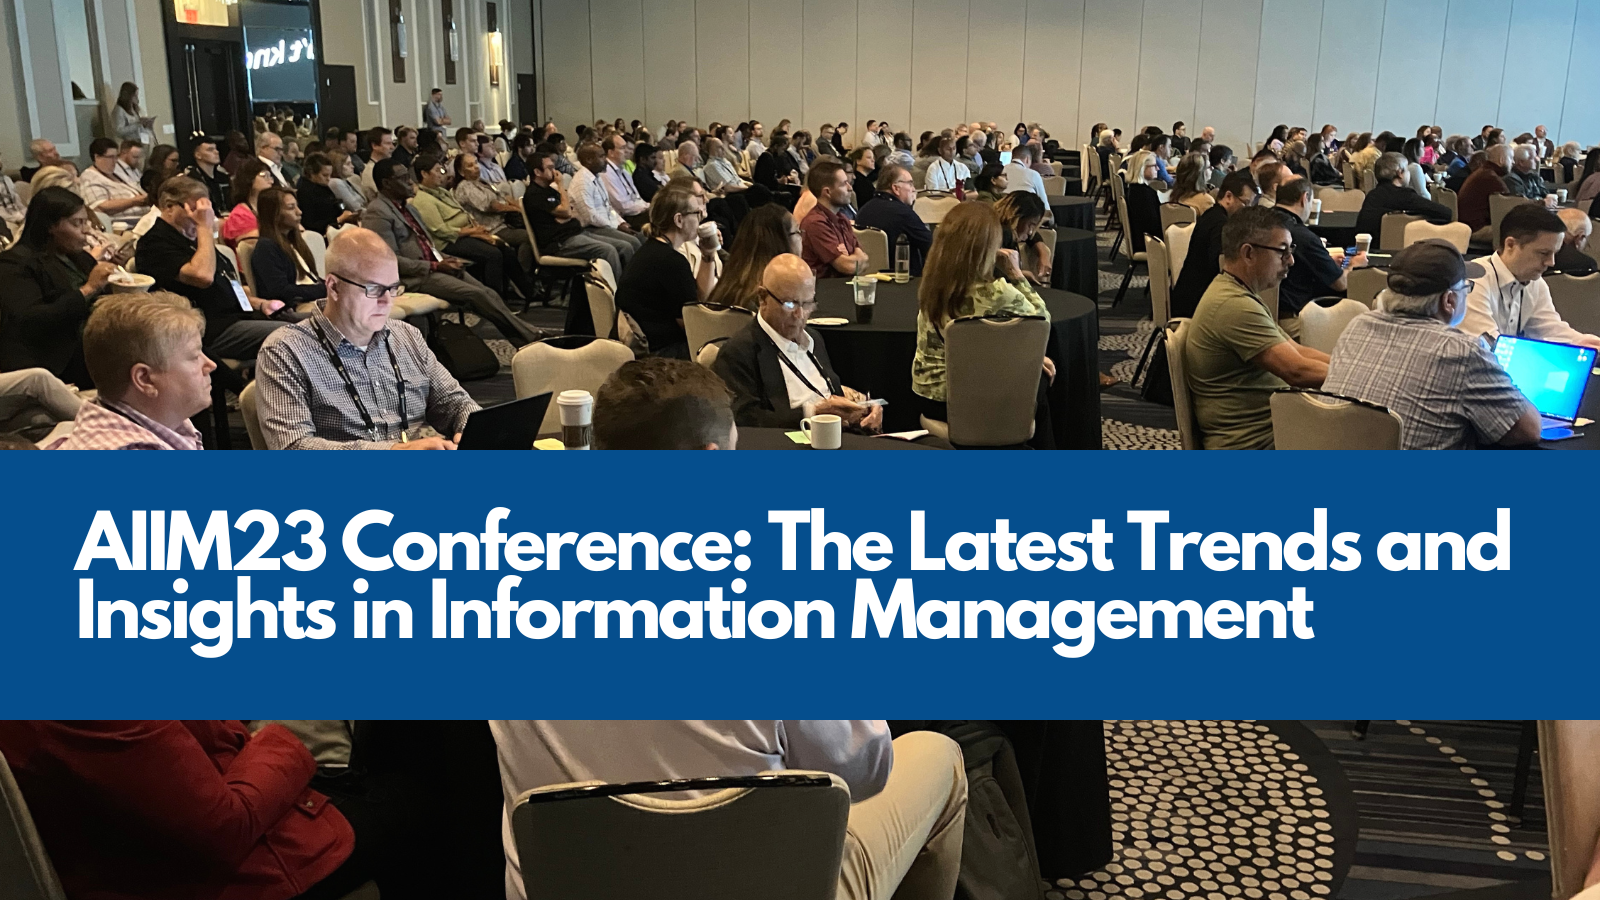 AIIM23 Conference: The Latest Trends and Insights in Information Management